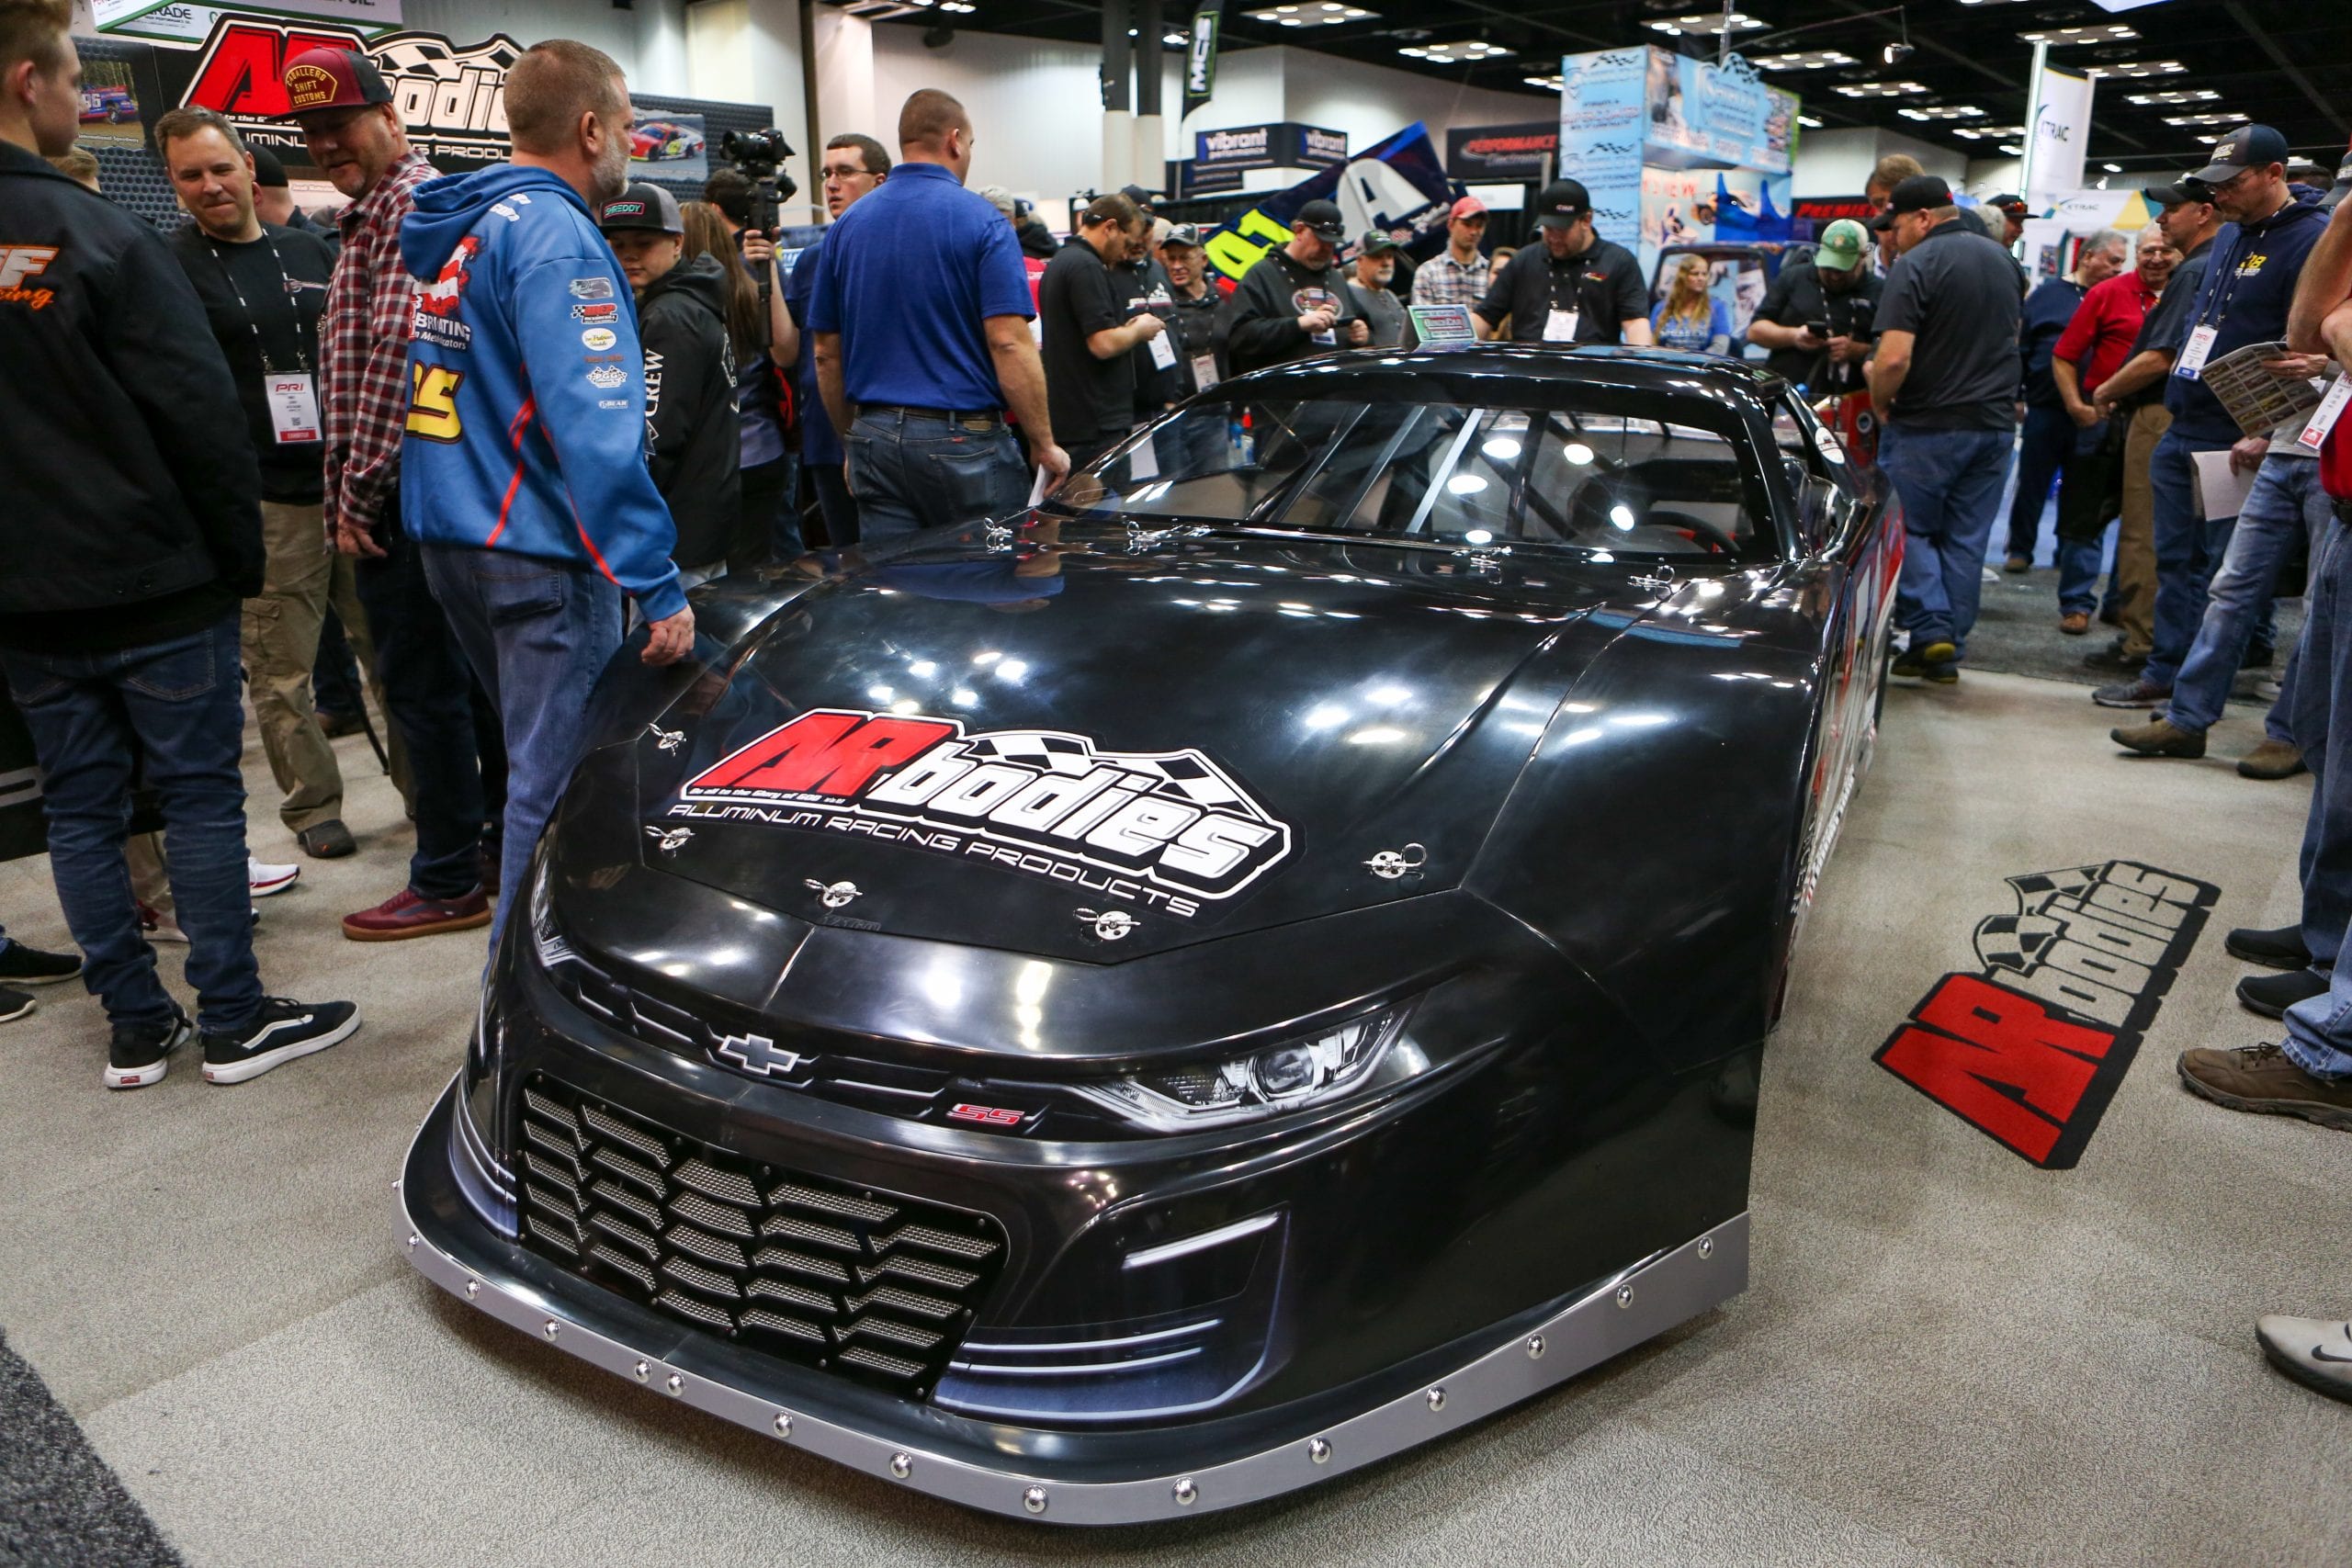 AR Bodies introduced the Revolution Camaro late model body on Thursday during the PRI Trade Show in Indianapolis. (Adam Fenwick Photo)